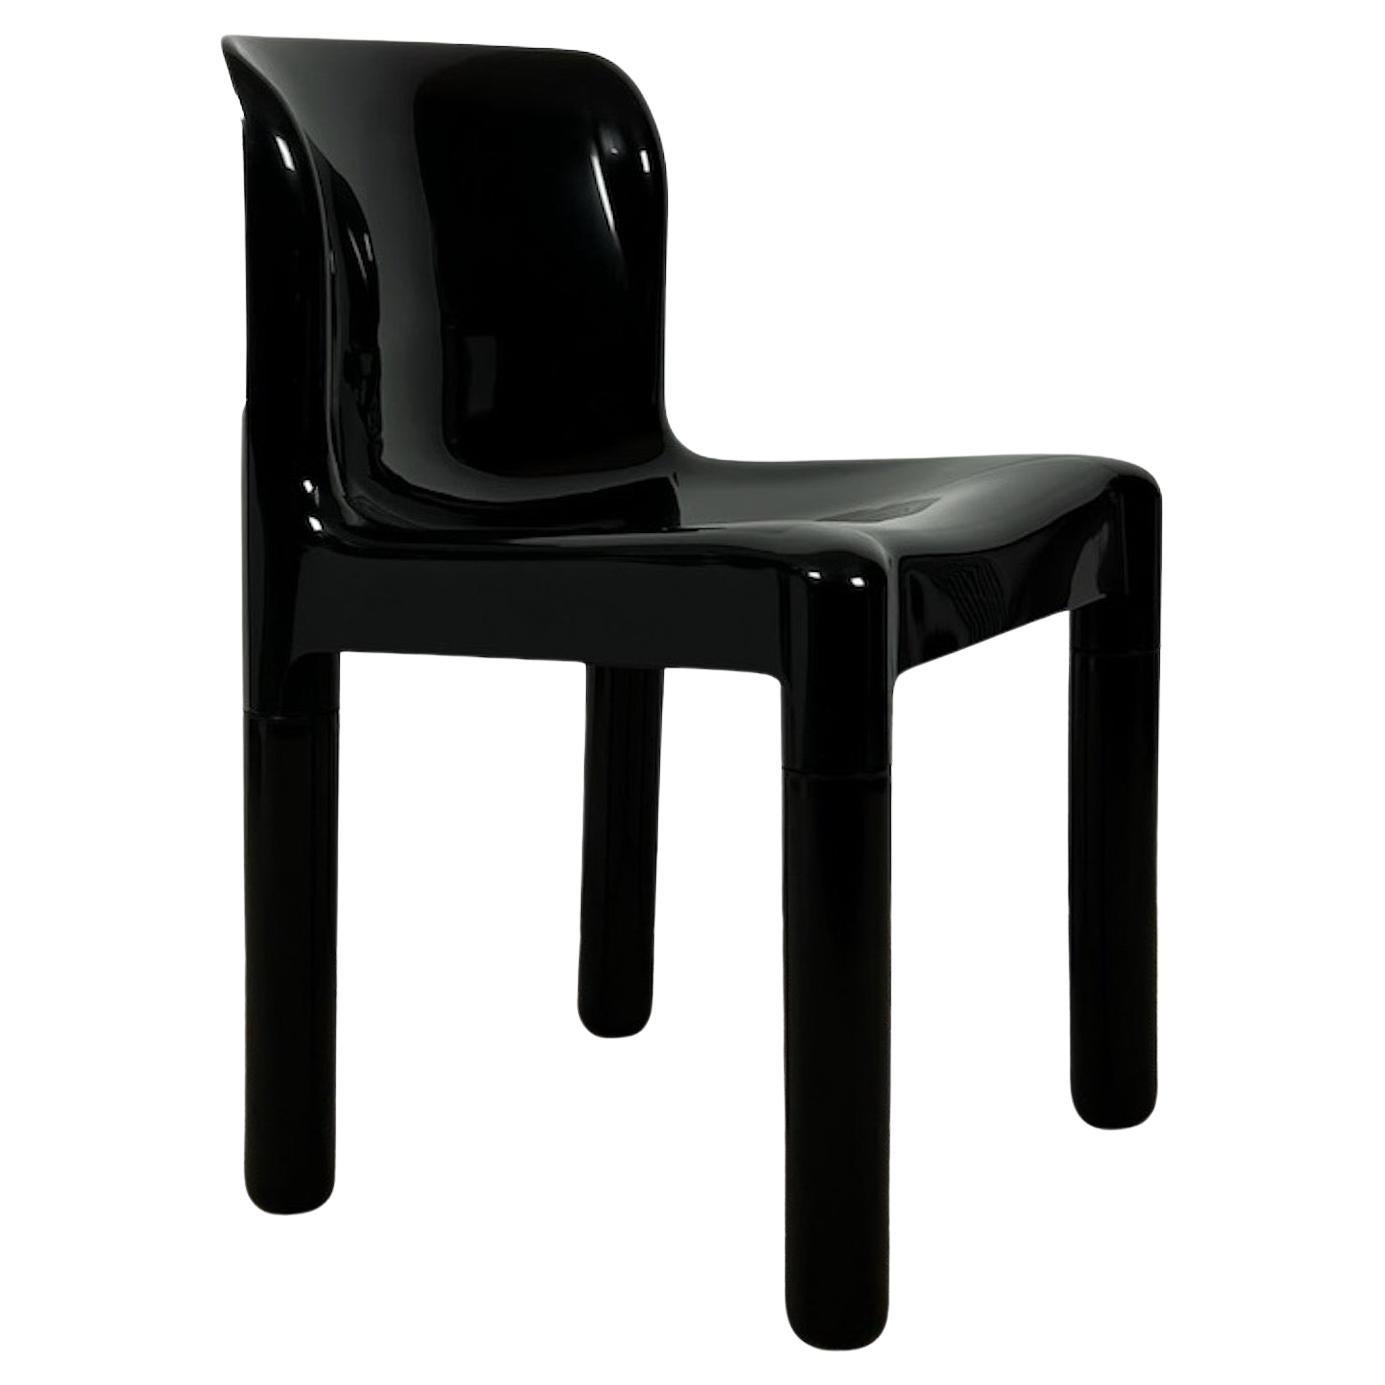 Kartell Model 4875 Chair by Carlo Bartoli - 1985 Edition New Old Stock in Black